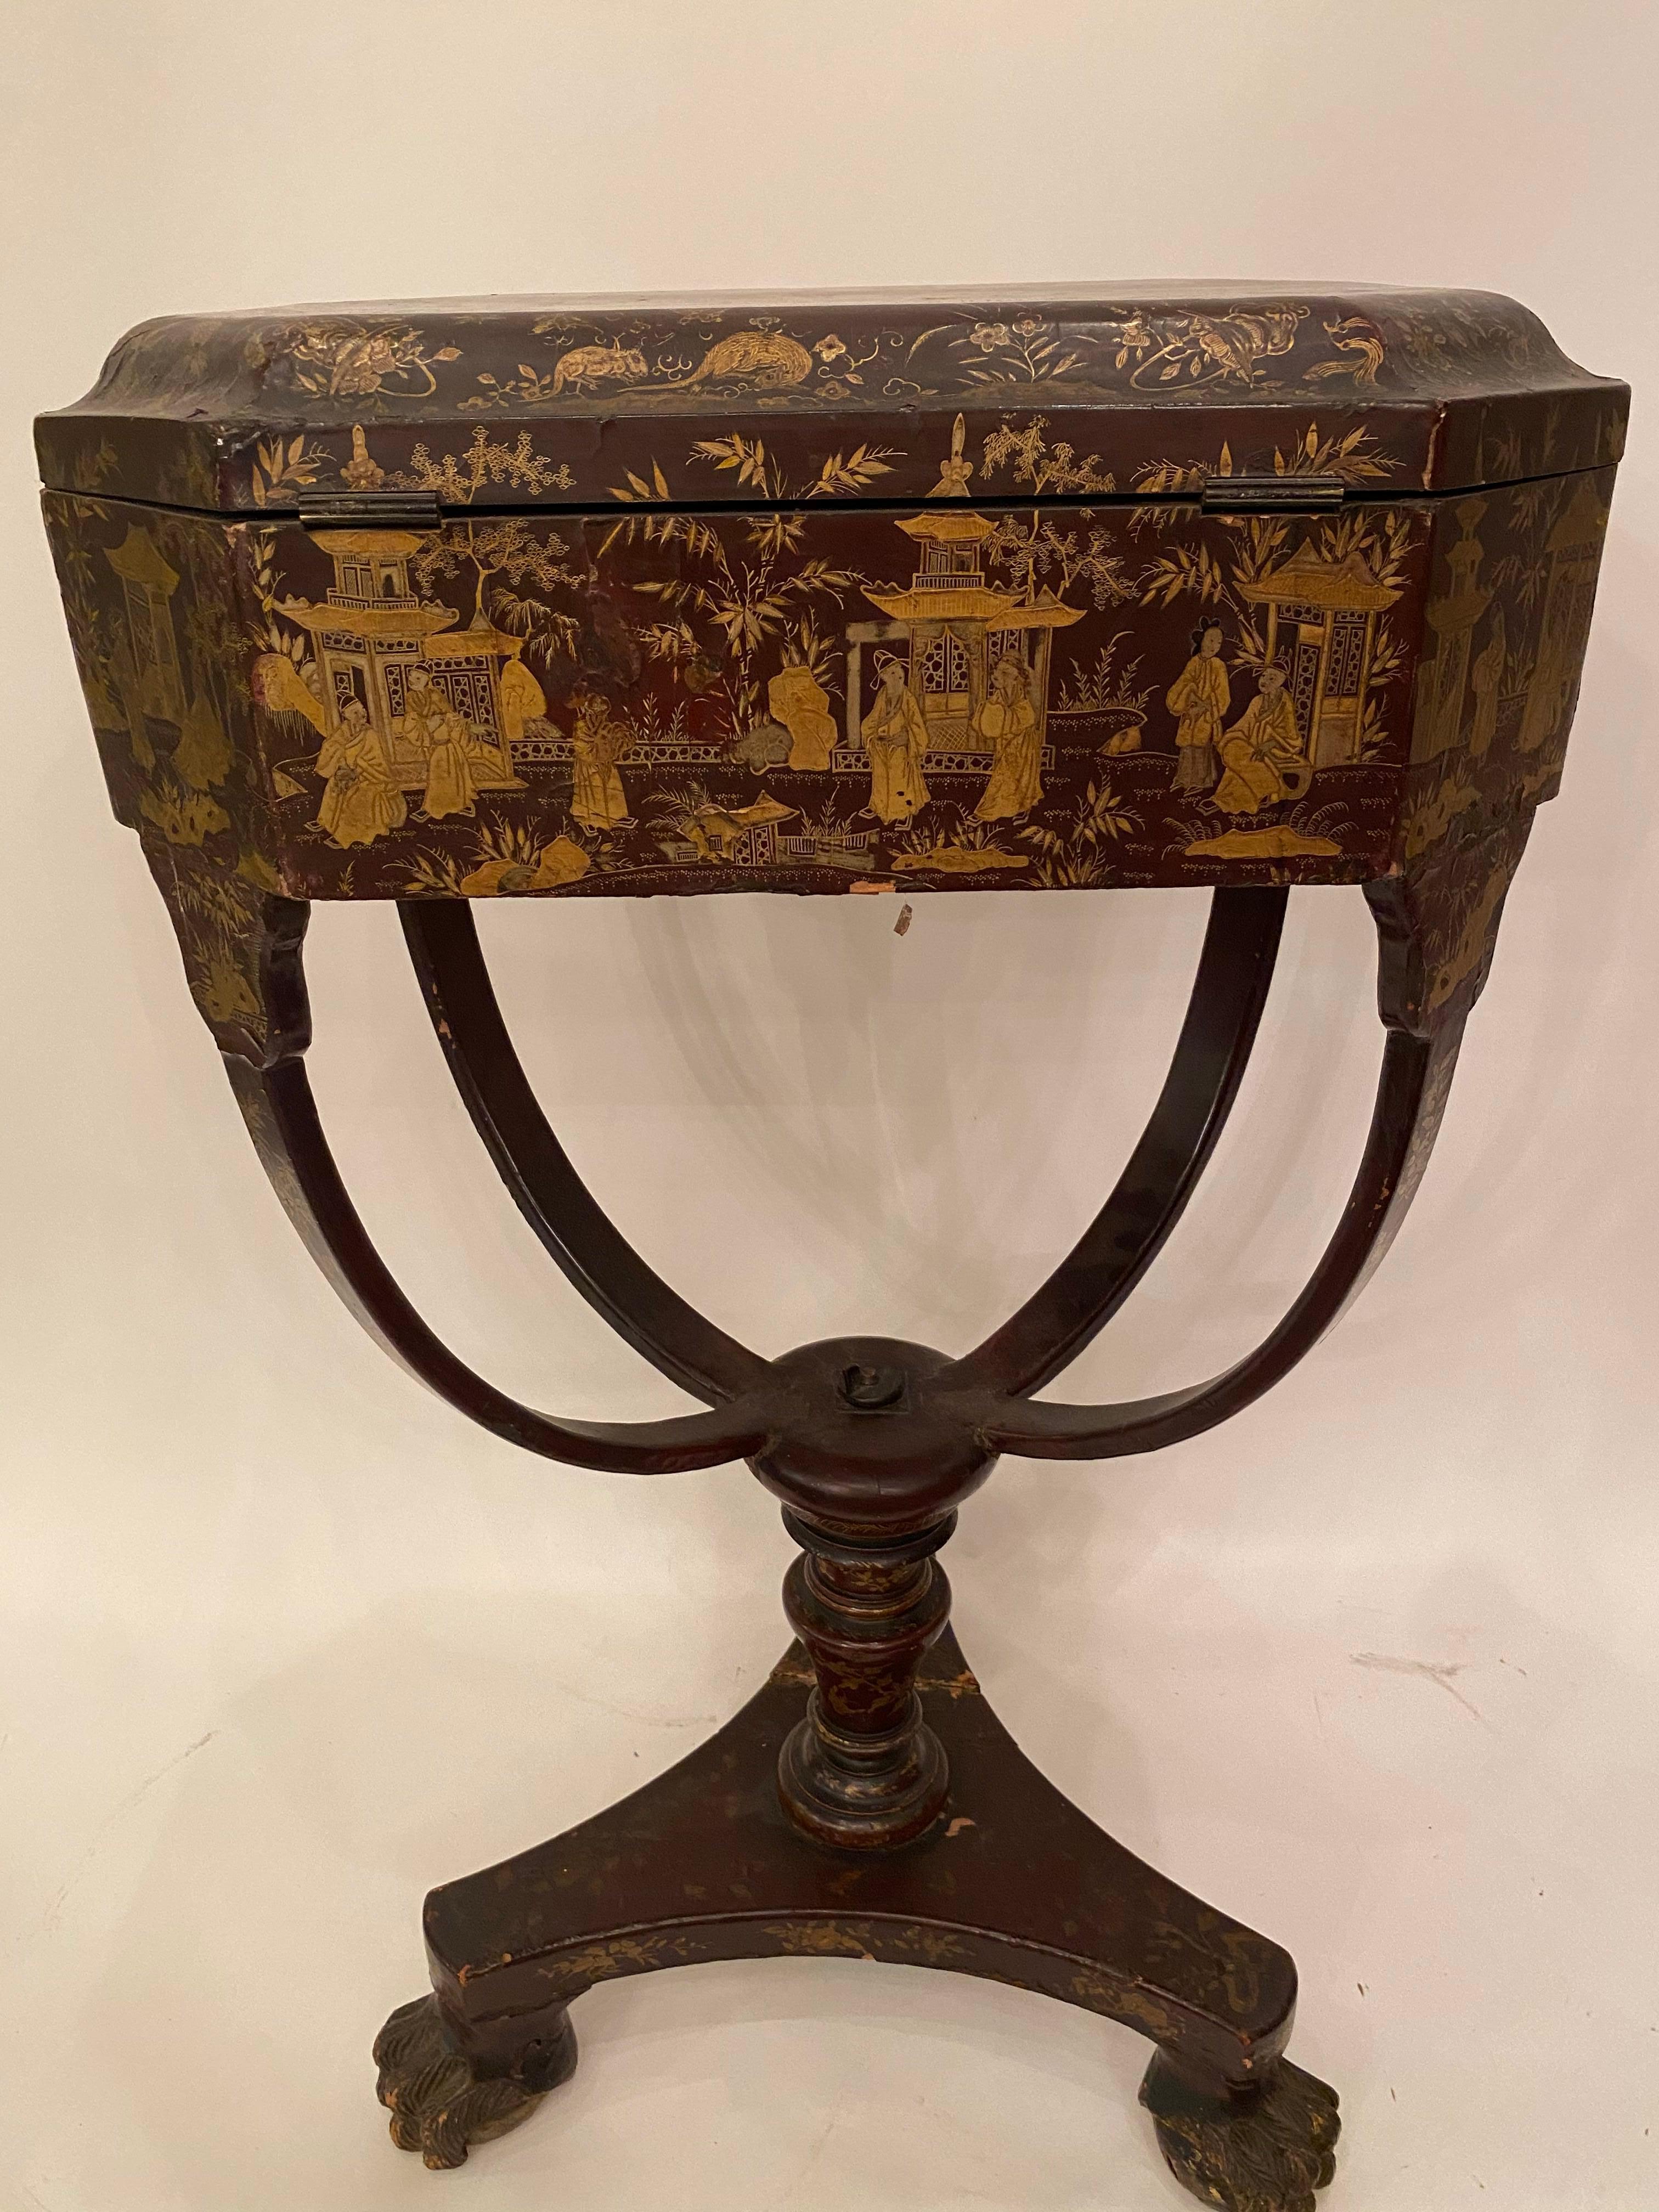 Antique 19th century Chinese lacquer sewing table with hand painted scenes and beautiful legs. Gilt export black lacquer all-over the table.